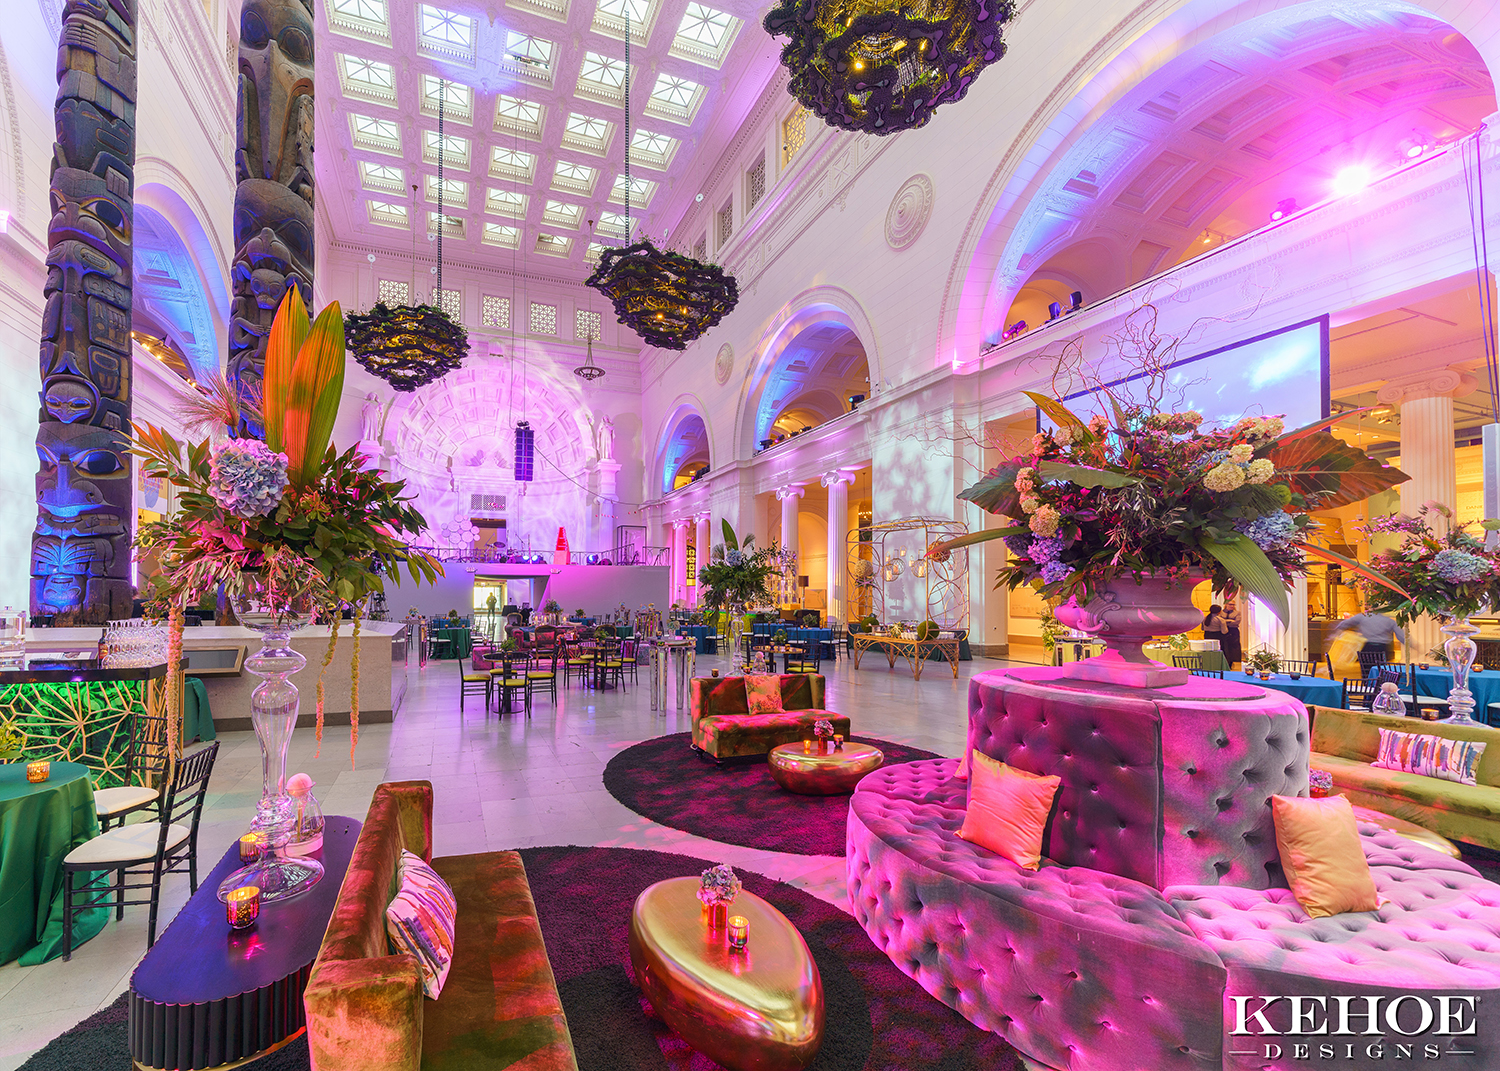 Warm, pink light fills Stanley Field Hall at the Field Museum, which is set up for an event with colorful tufted couches, rugs, and gold coffee tables. Floral arrangements decorate the space.